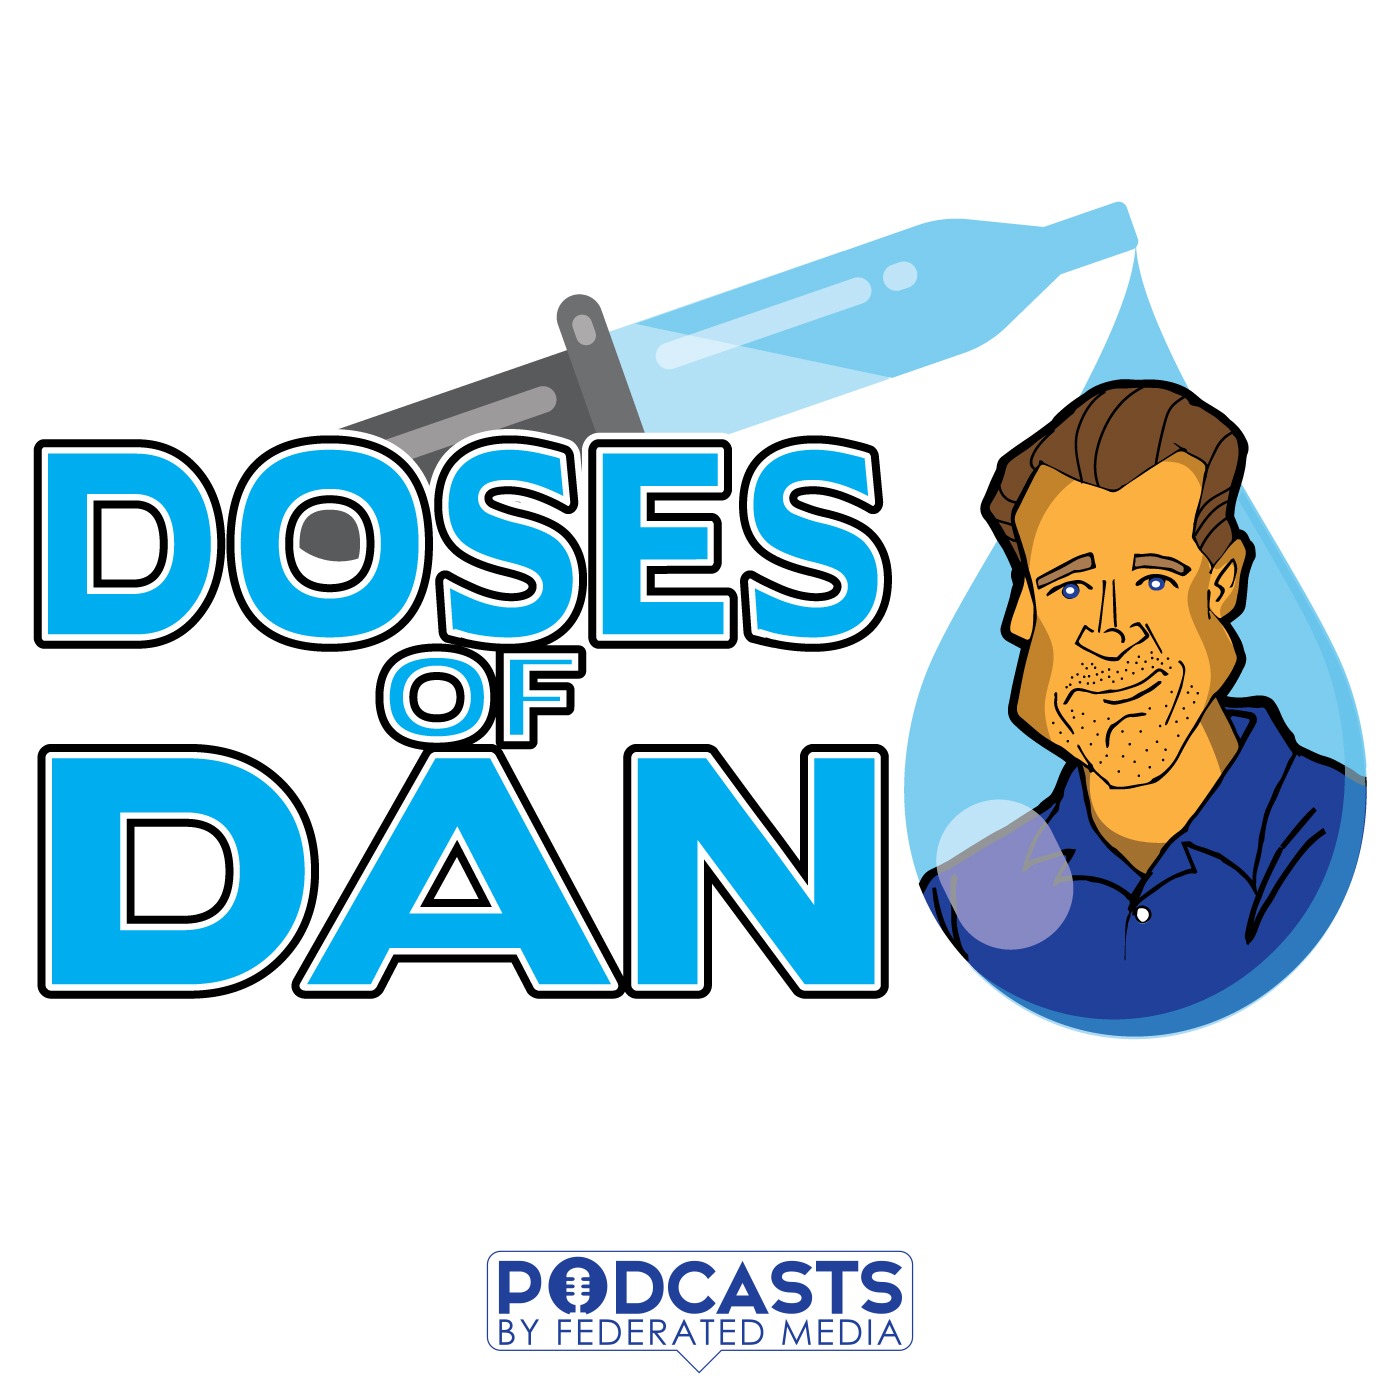 DOSES OF DAN (K105 HIGH 5/WHAT 'TWISTY' MEANS TO YOU/REST STOP HONORS/THINGS YOU STILL USE OR HAVE FROM CHILDHOOD)